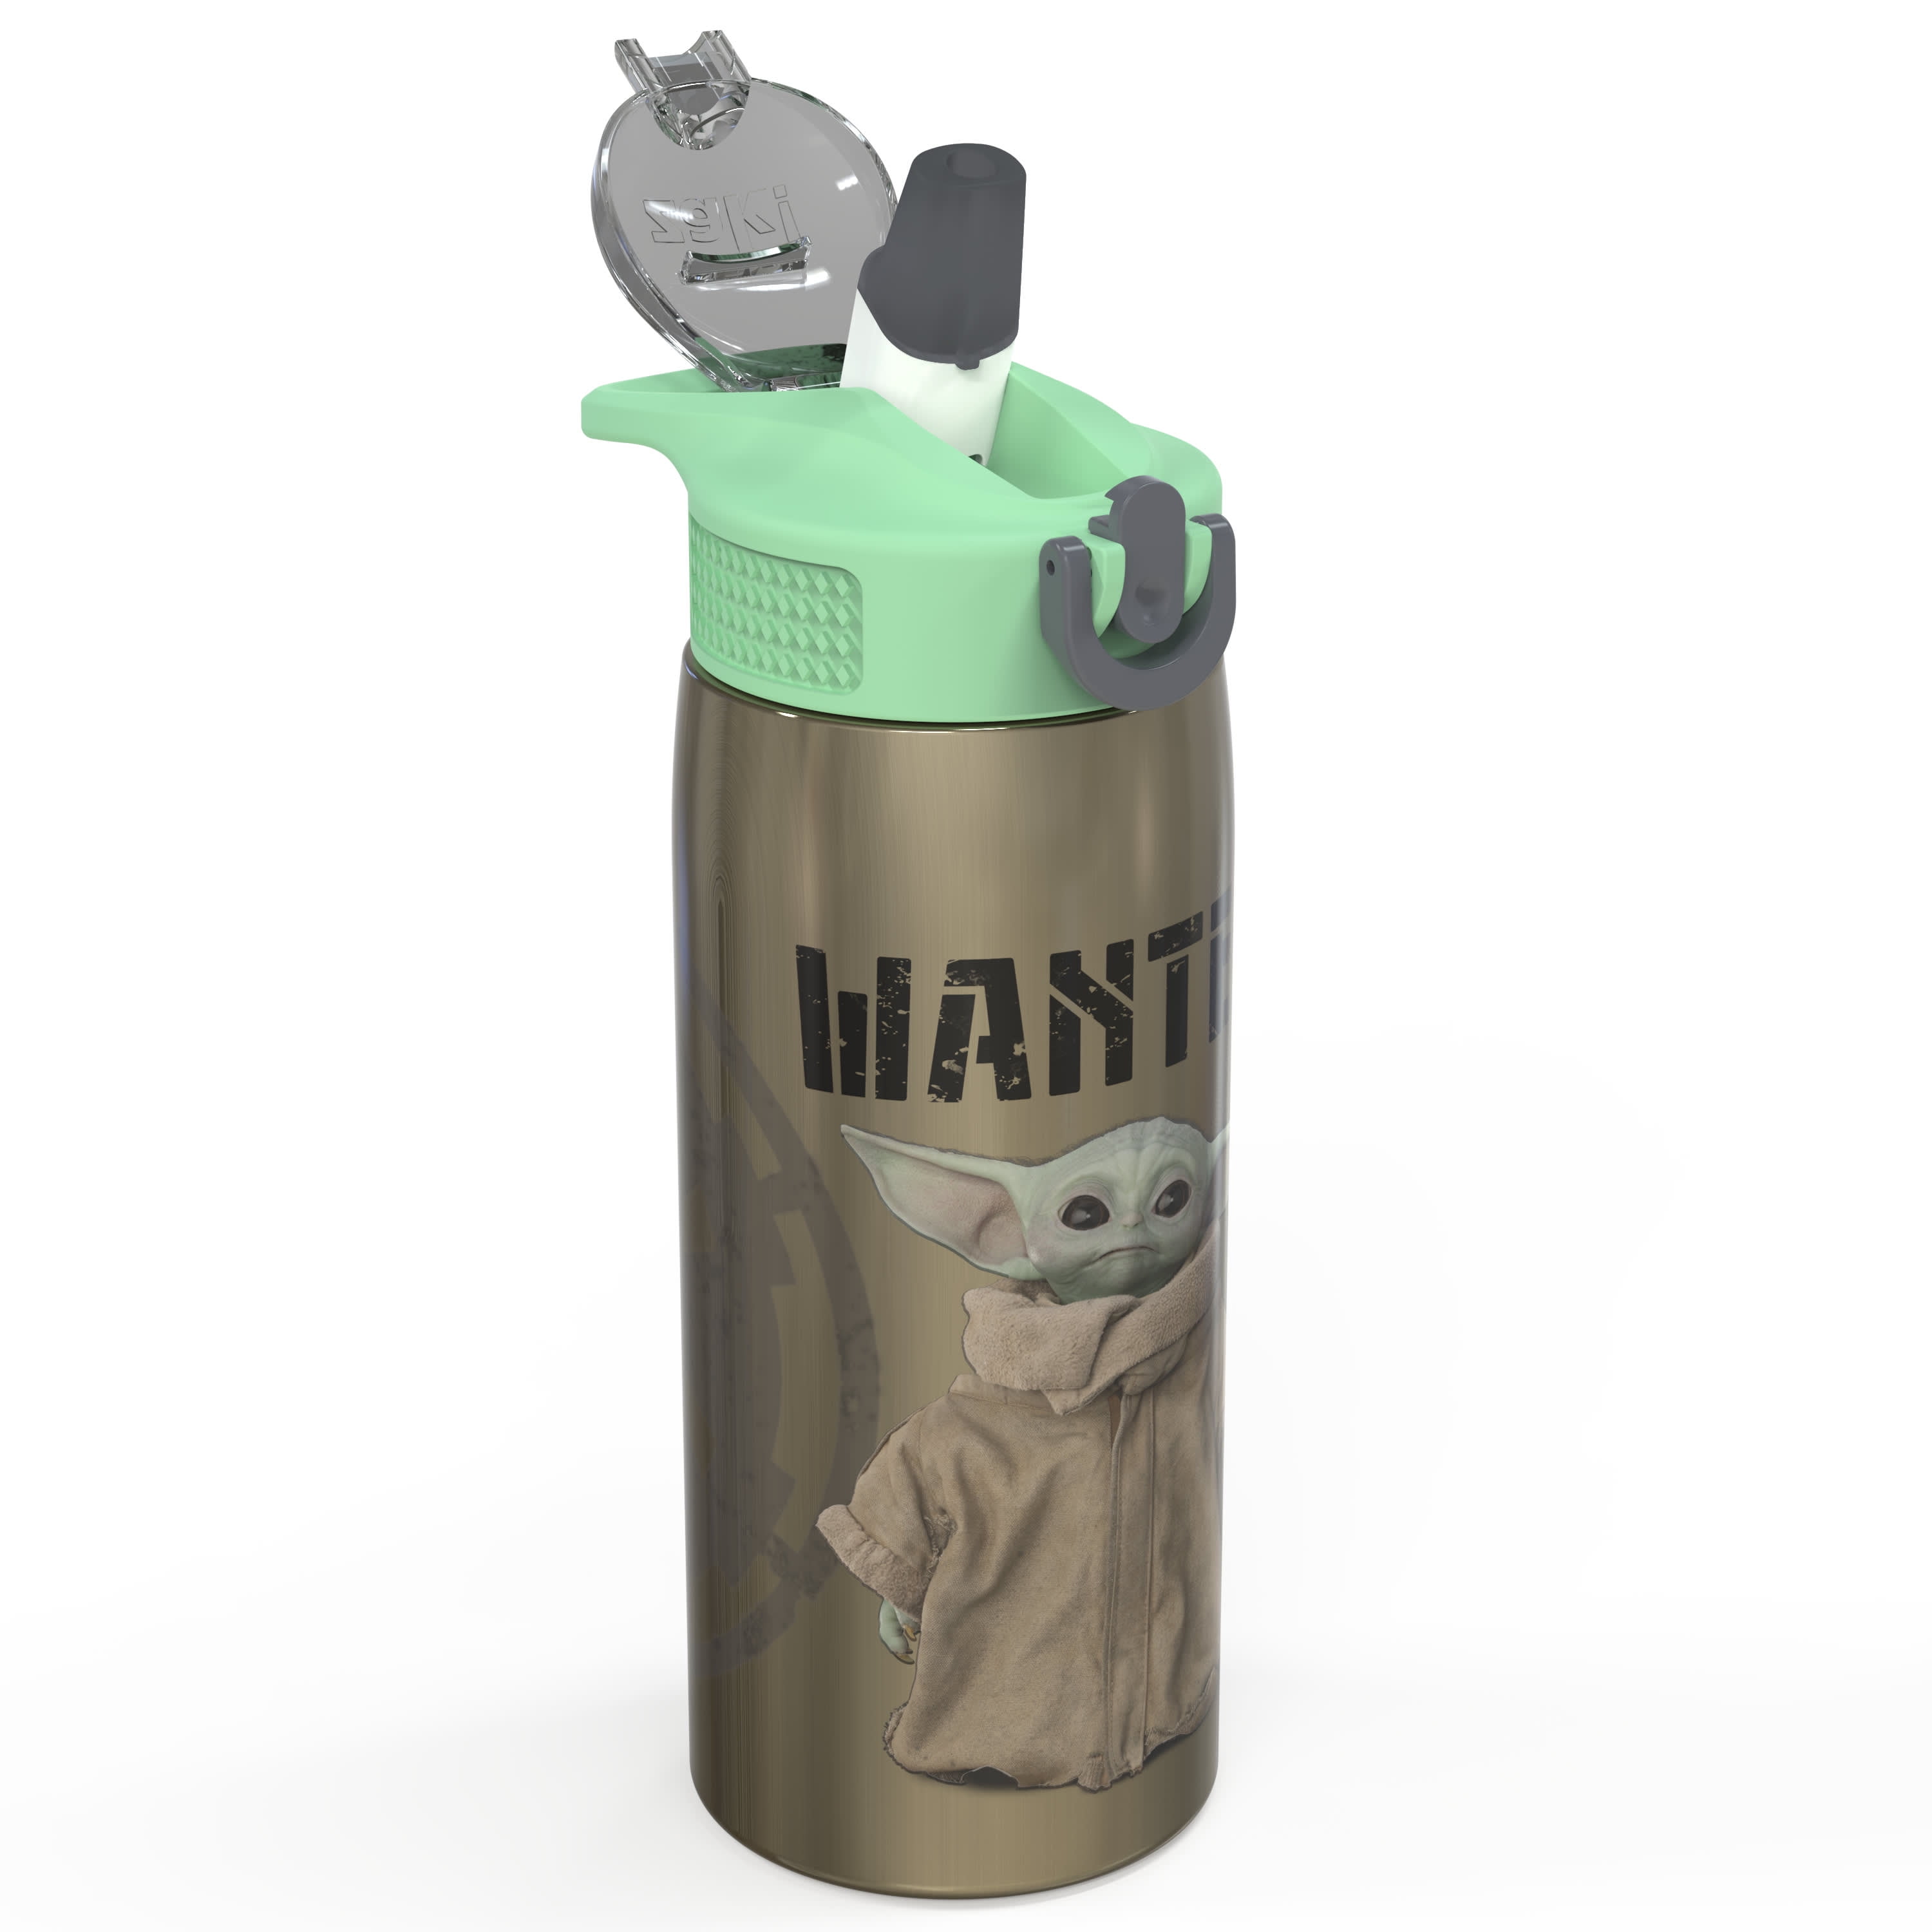 Zak Designs Star Wars The Mandalorian Plastic Water Bottle with Push Button Action, Locking Lid, and Portable Carry Loop, Includes 2 Reusable Straws